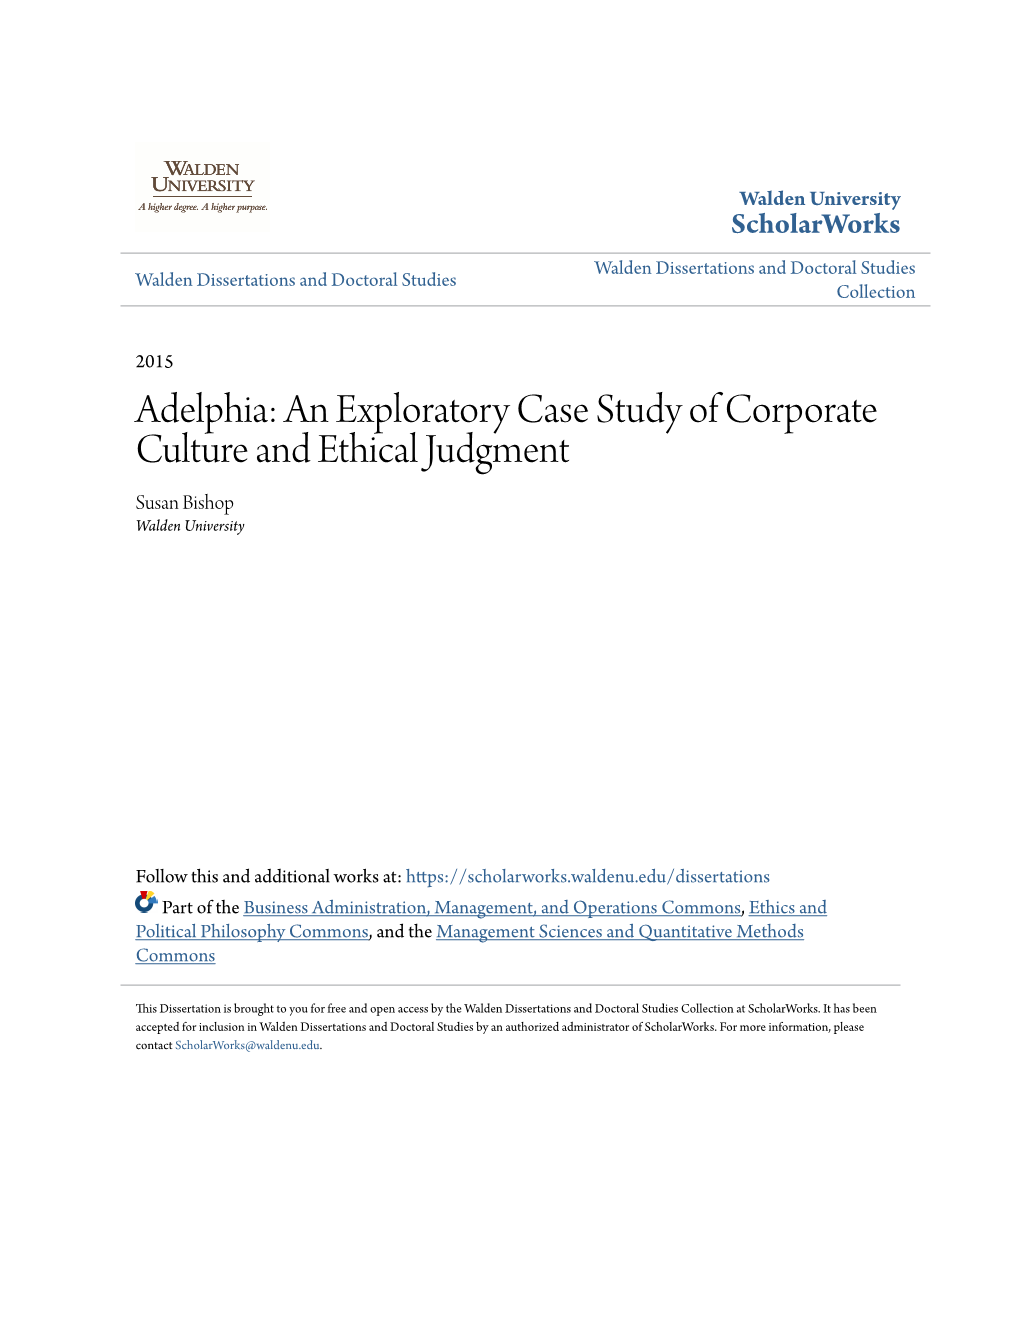 Adelphia: an Exploratory Case Study of Corporate Culture and Ethical Judgment Susan Bishop Walden University